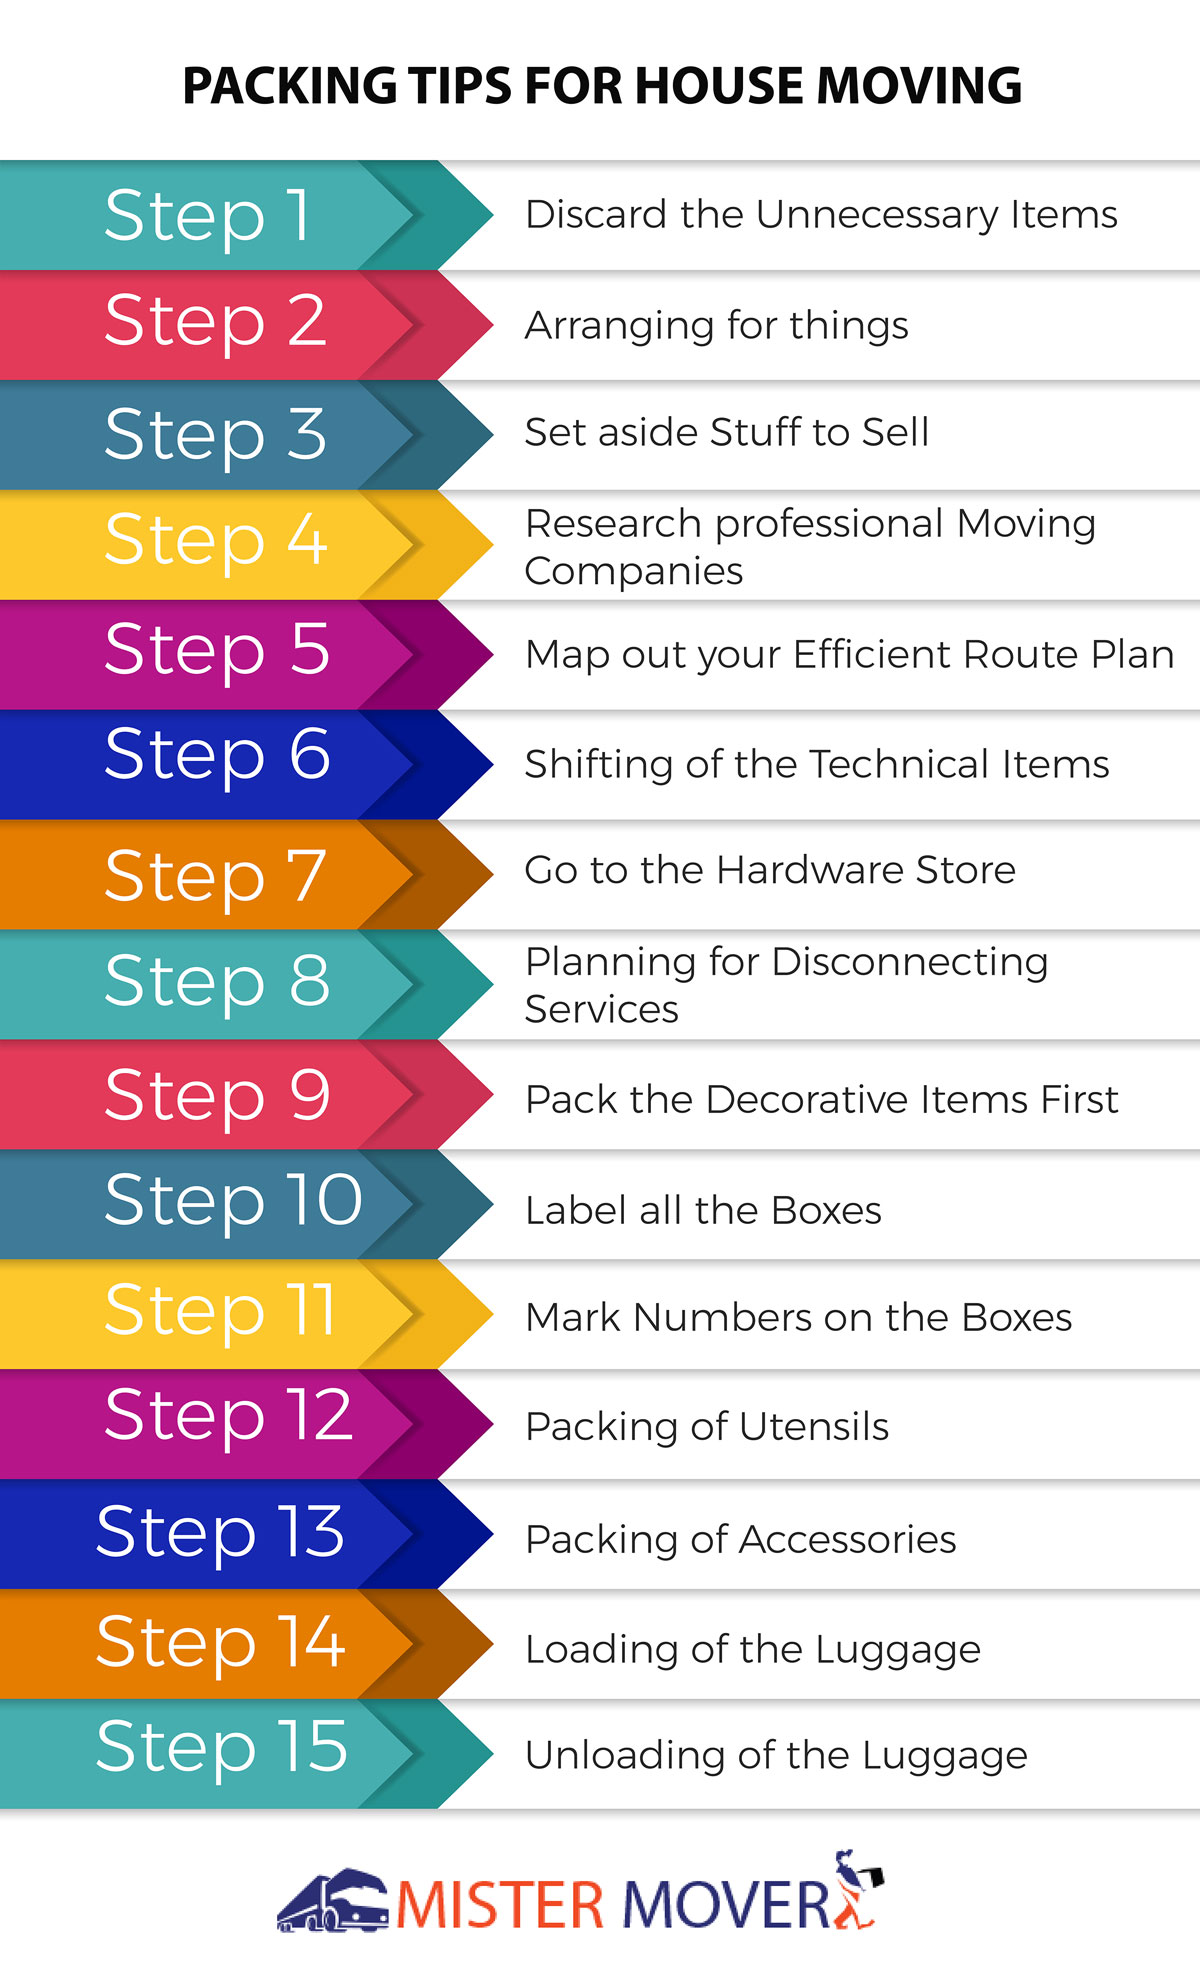 packing checklist for moving